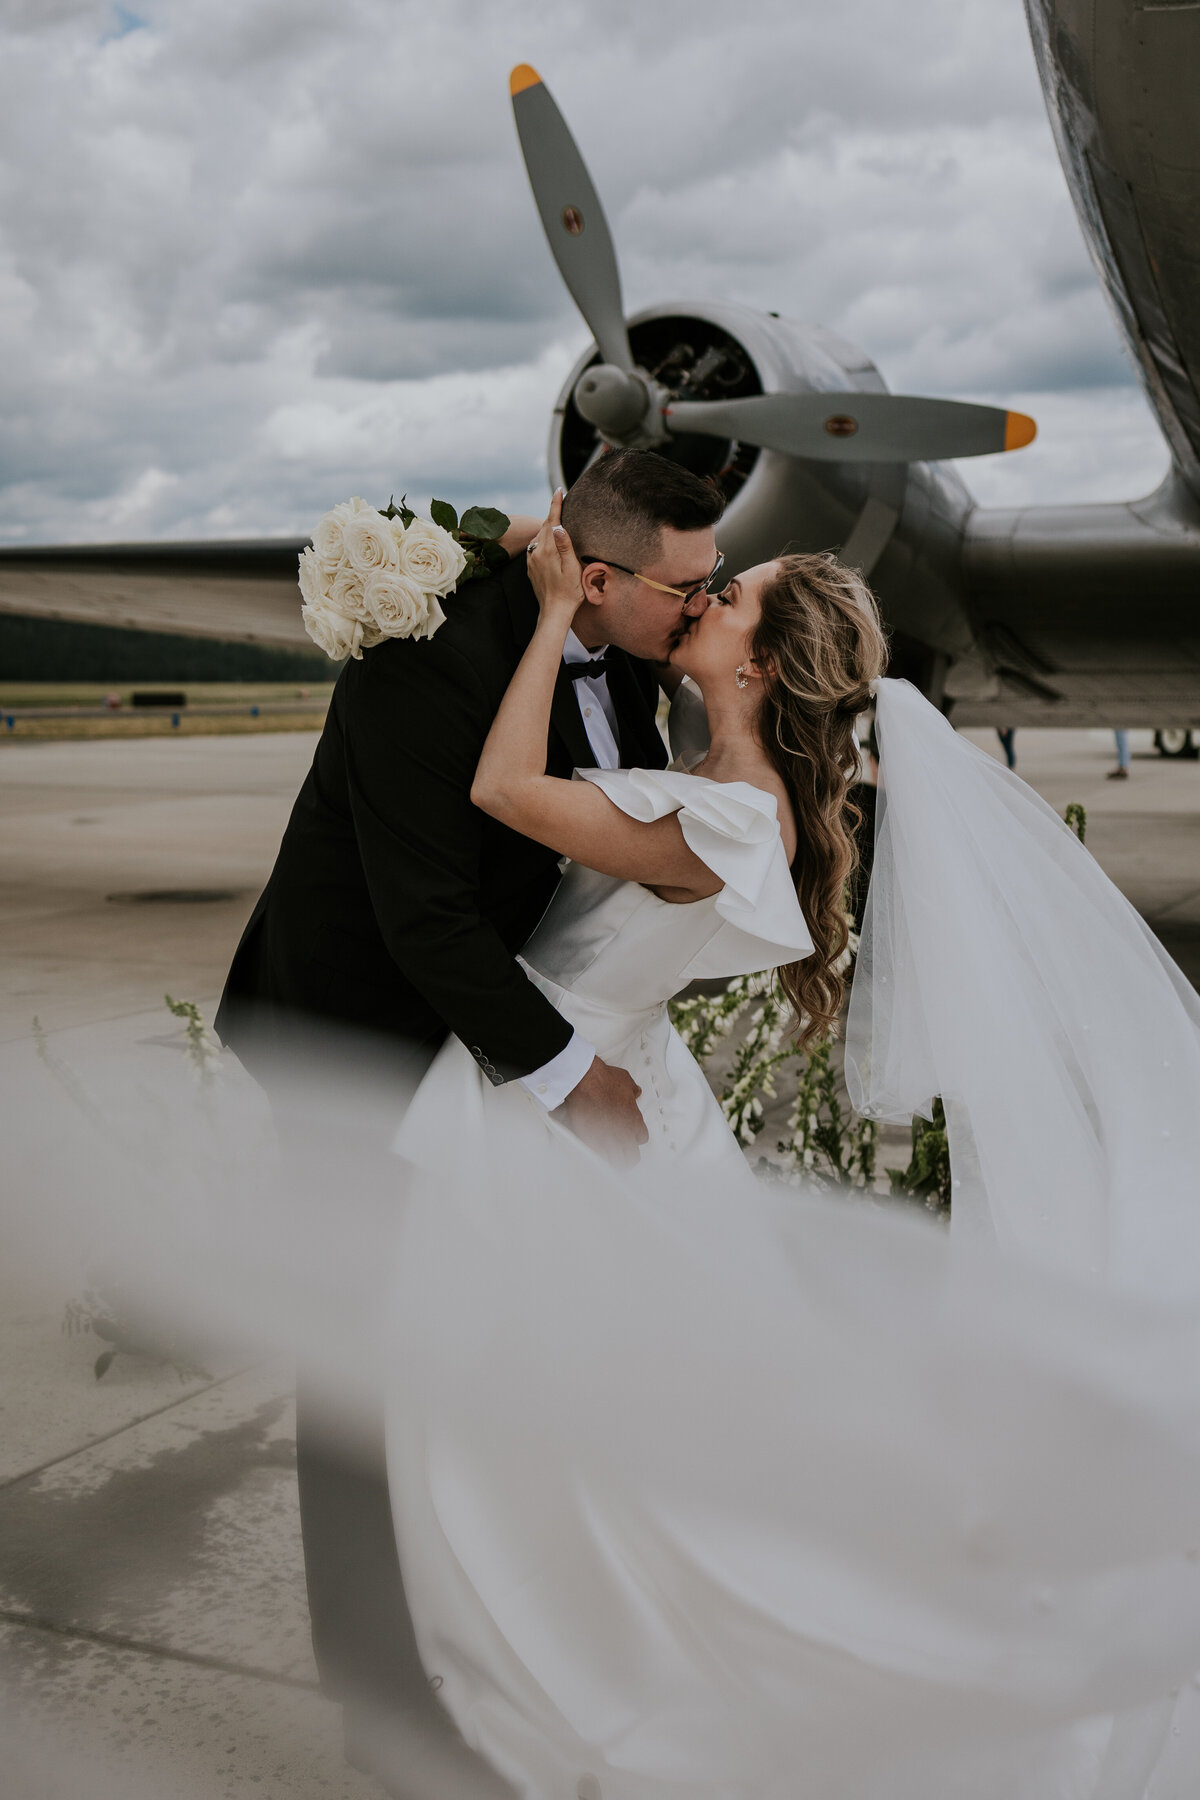 Bride and groom kiss while standing in front of WWII plane.